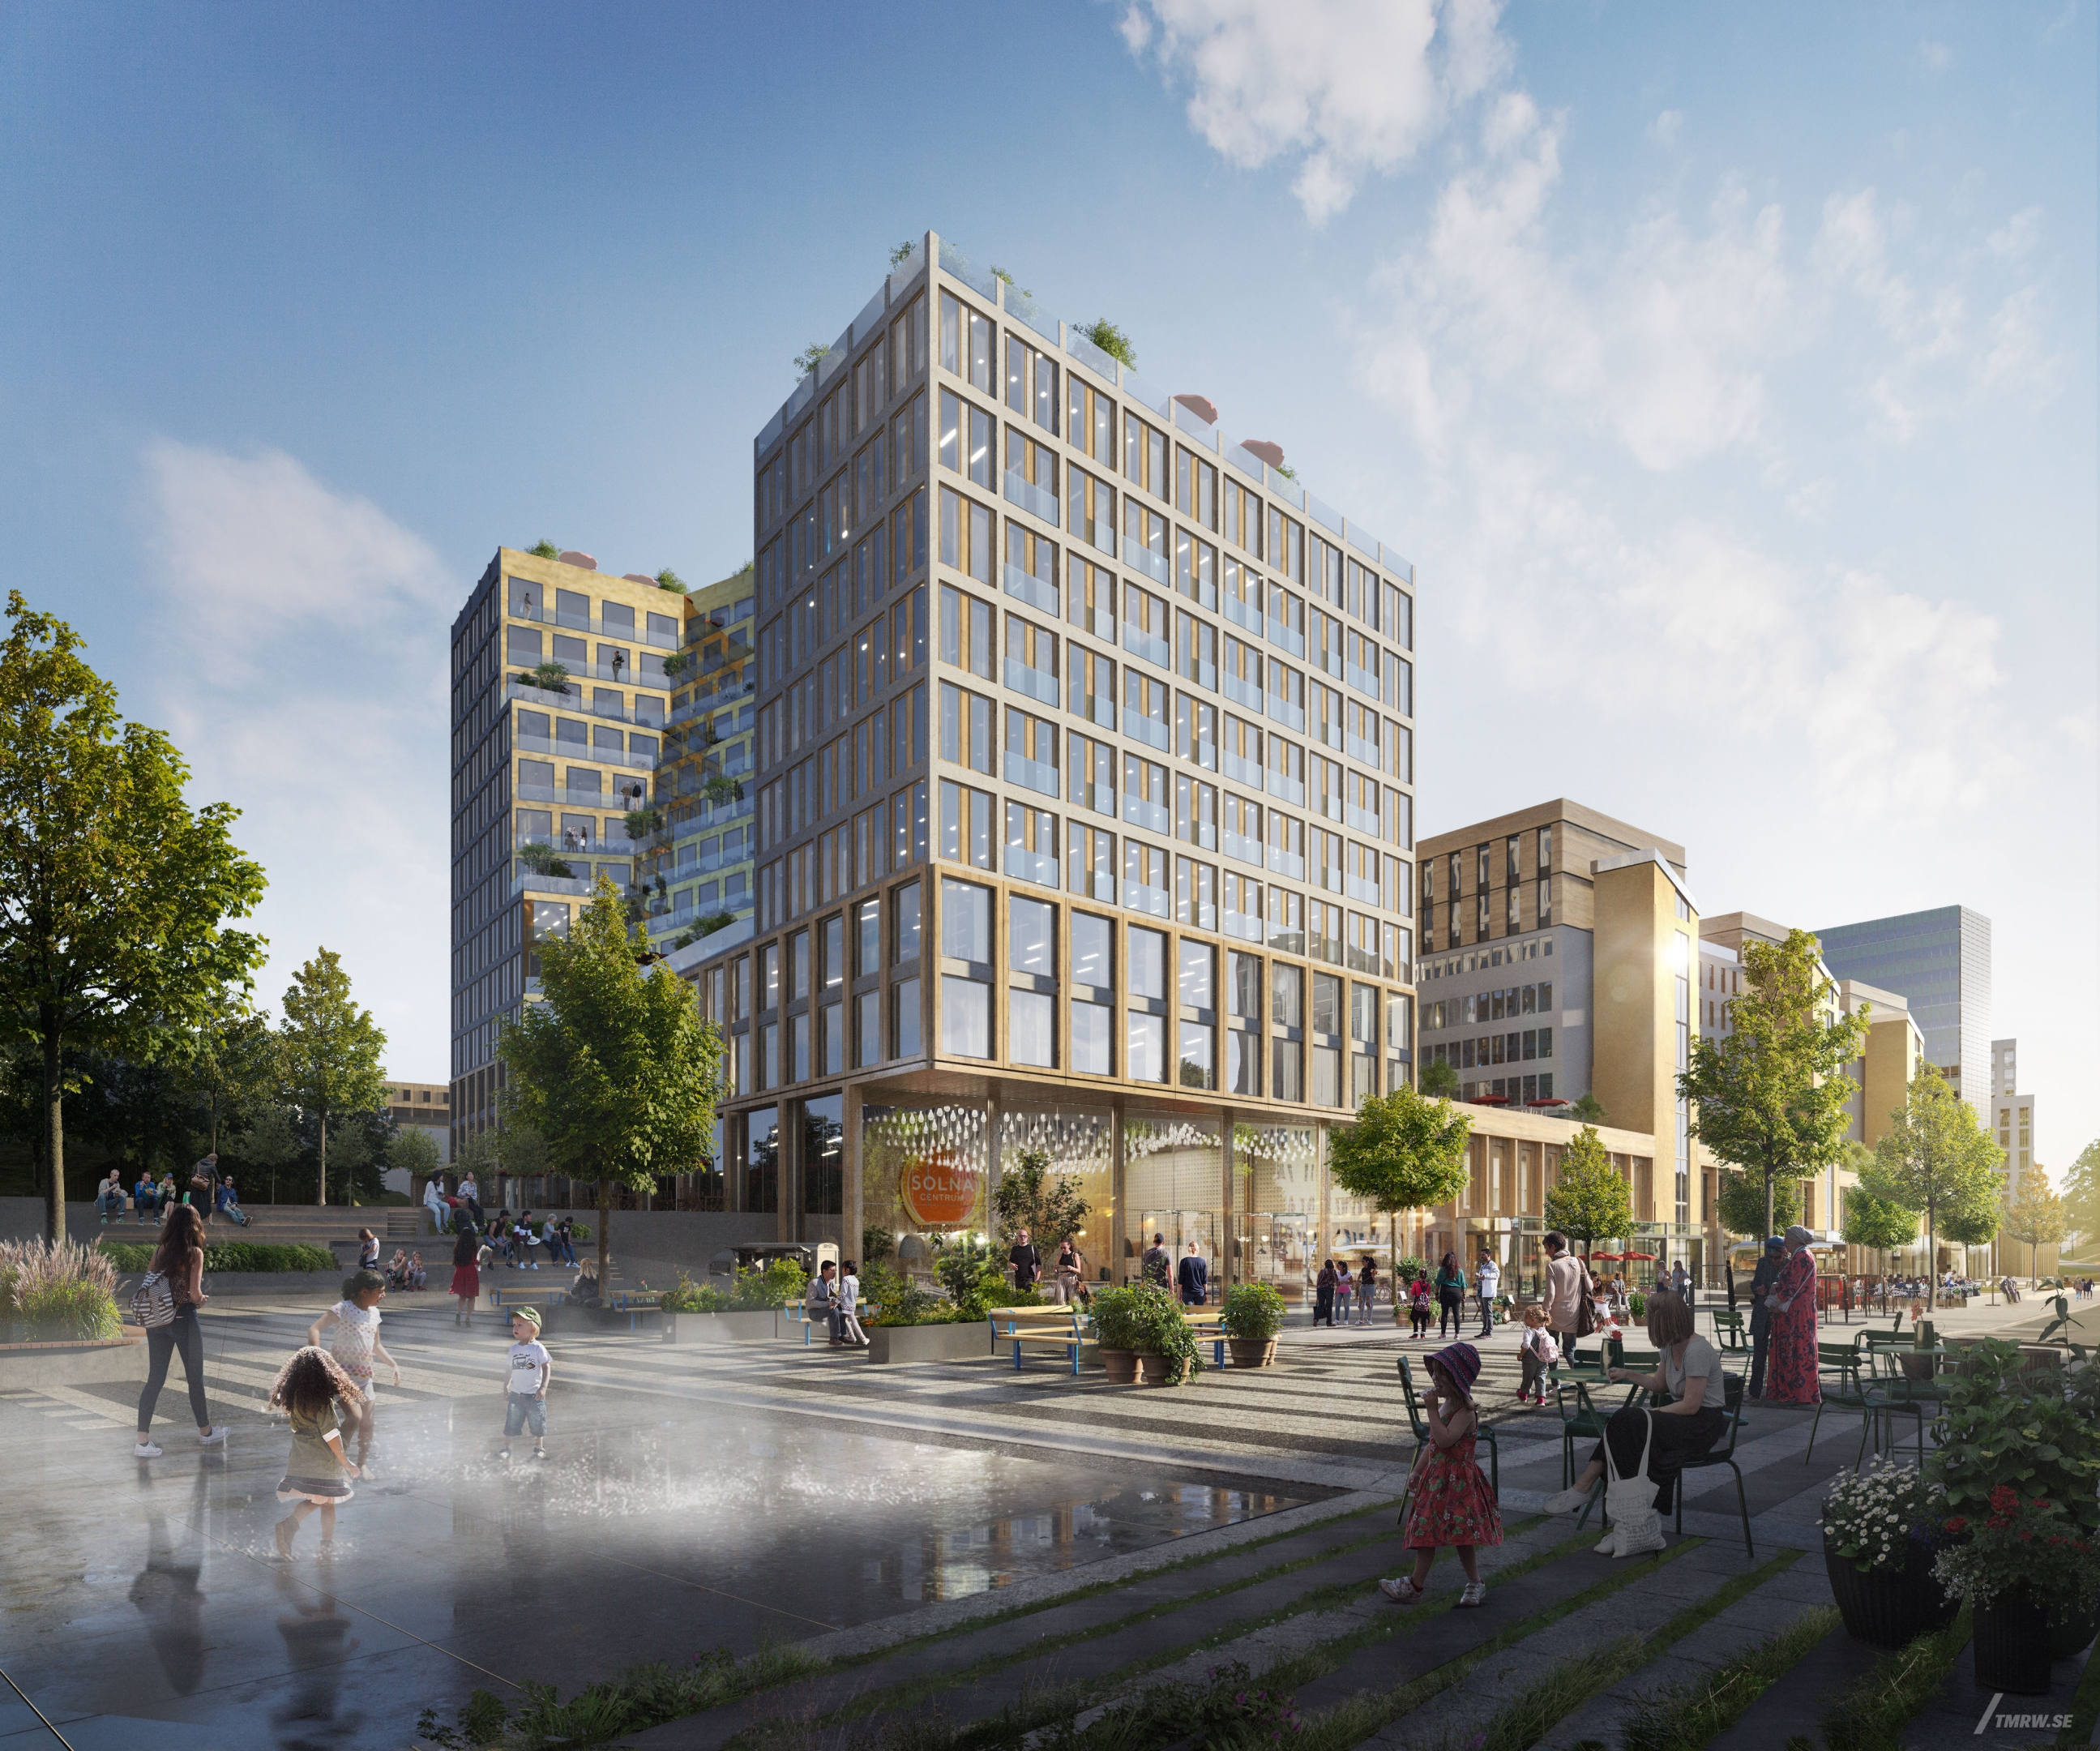 Architectural visualization of Solna Centrum for Unibail-Rodamco-Westfield. An image of the exterior of a retail building with pedestrians on the square infront in daylight from street view.